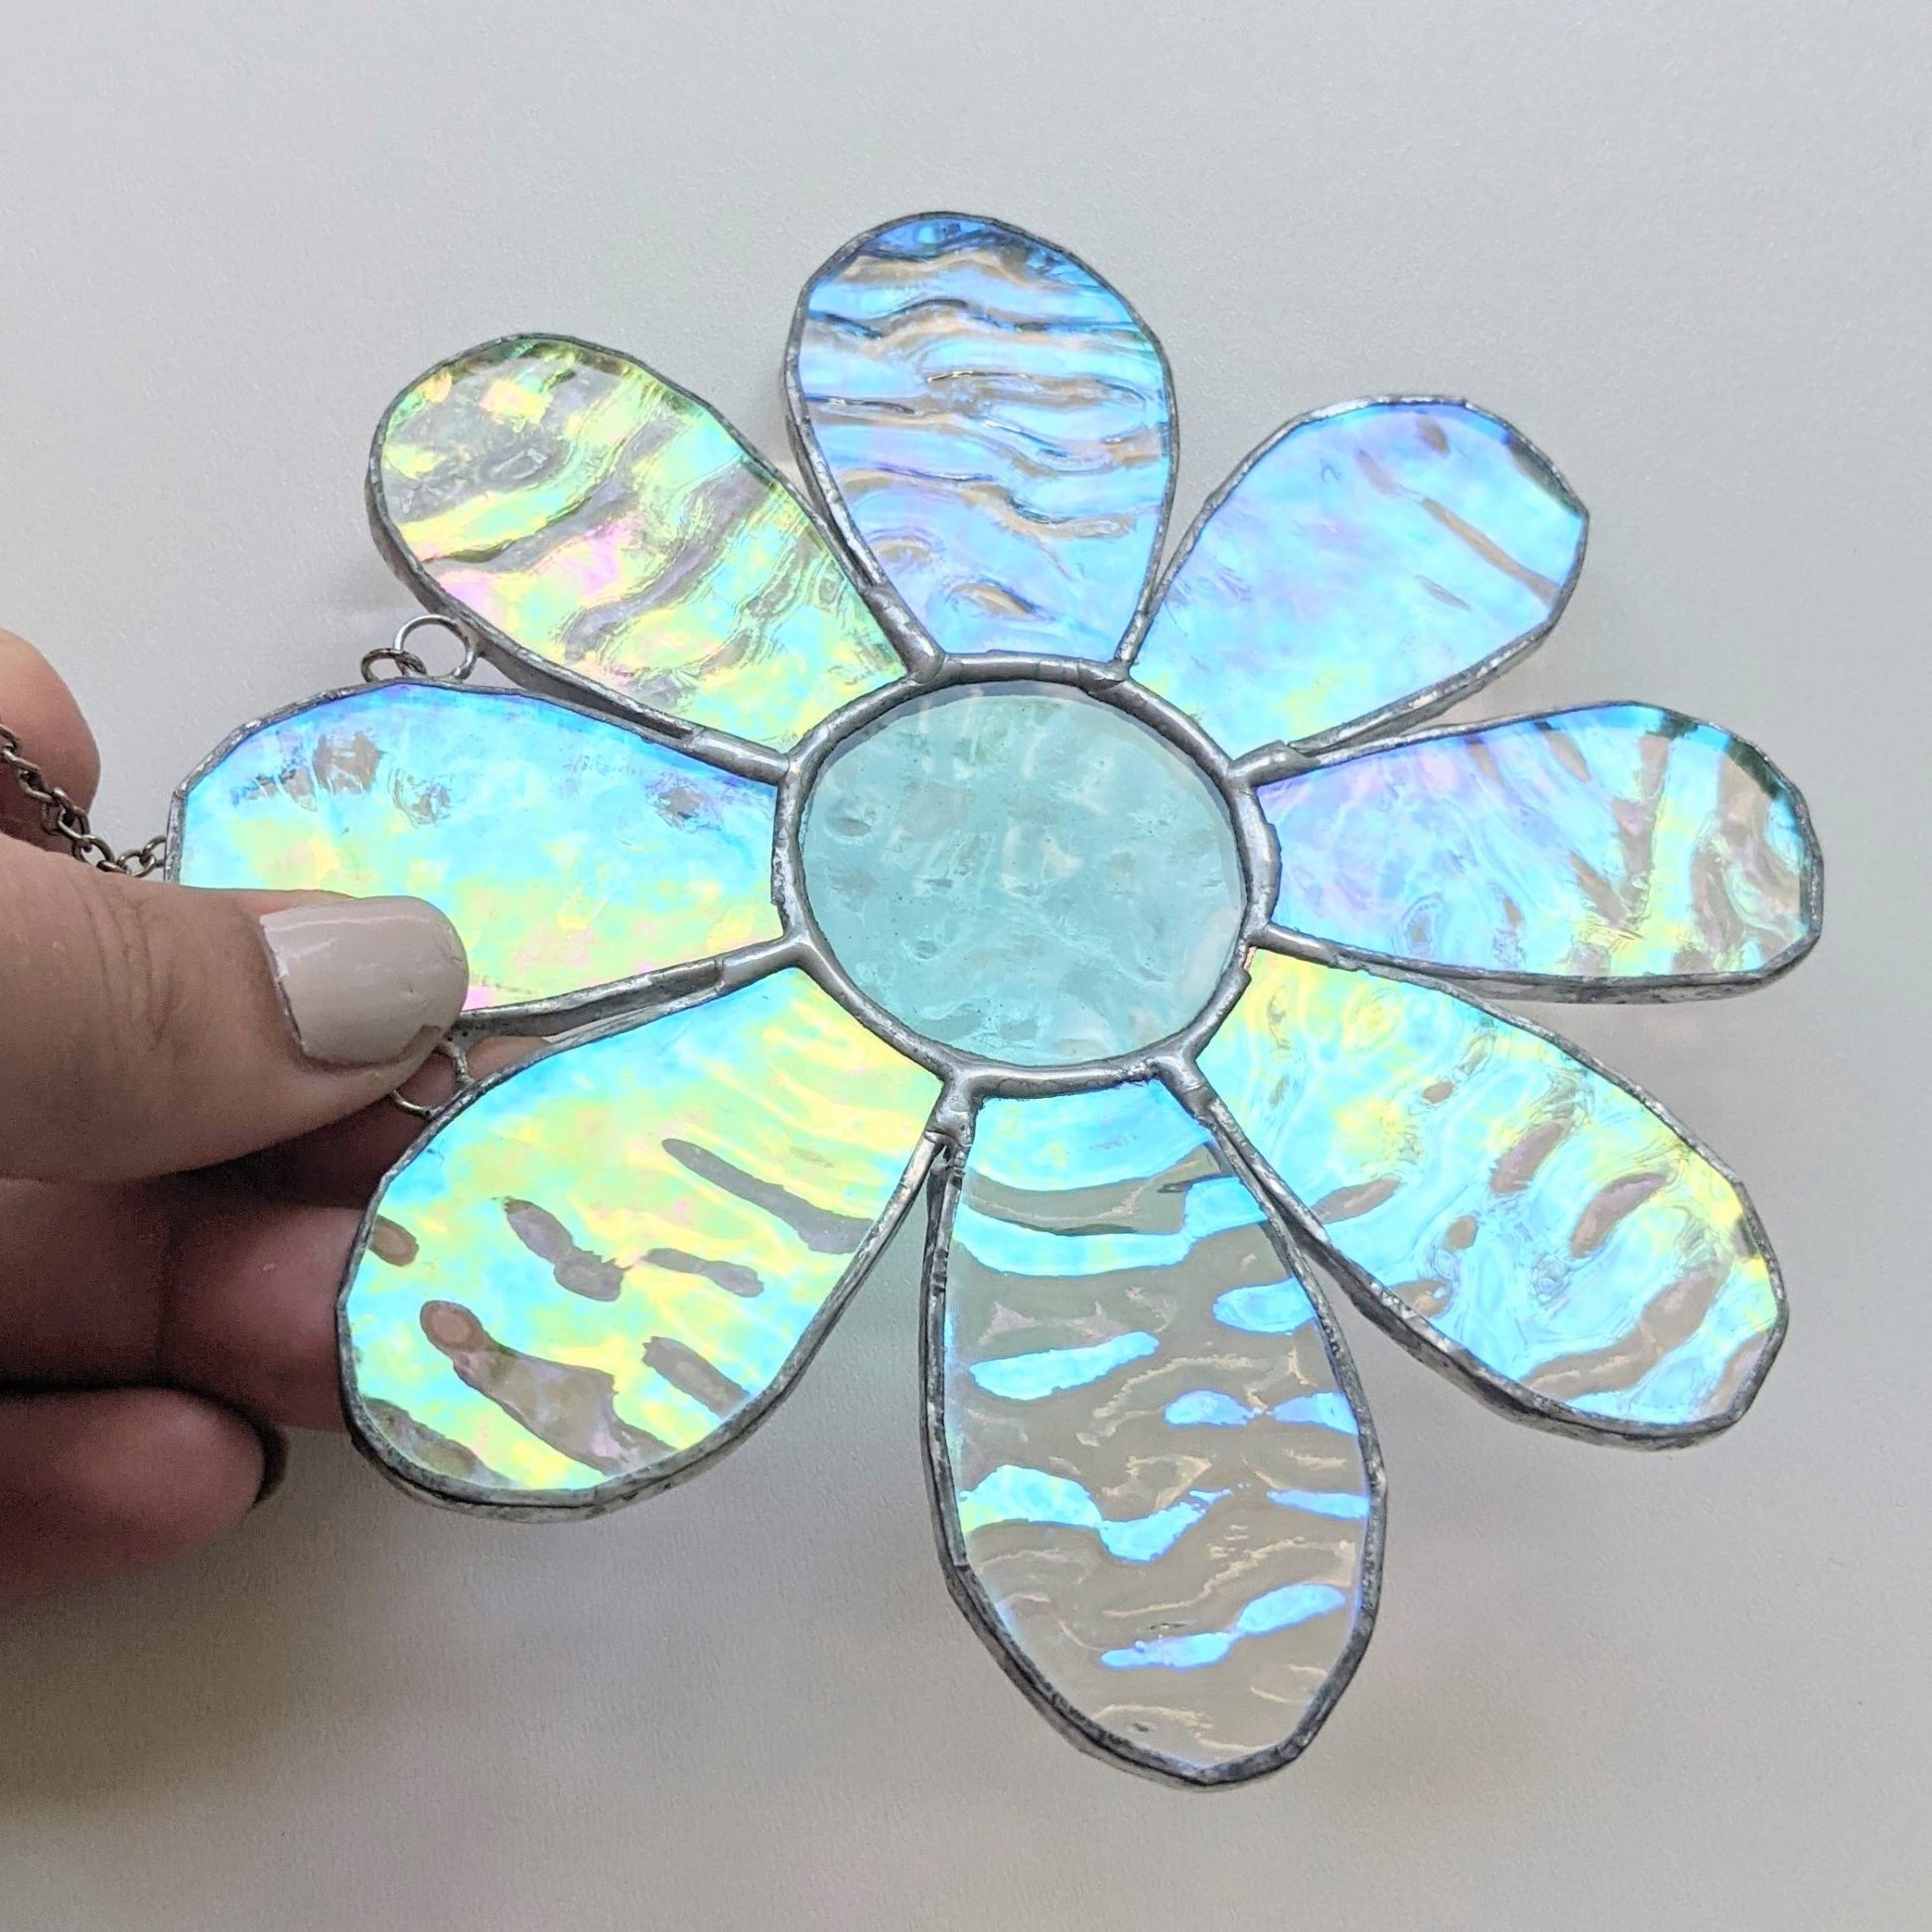 Stained Glass | Iridescent Daisy #5 - Freehand Market -Freehand Market